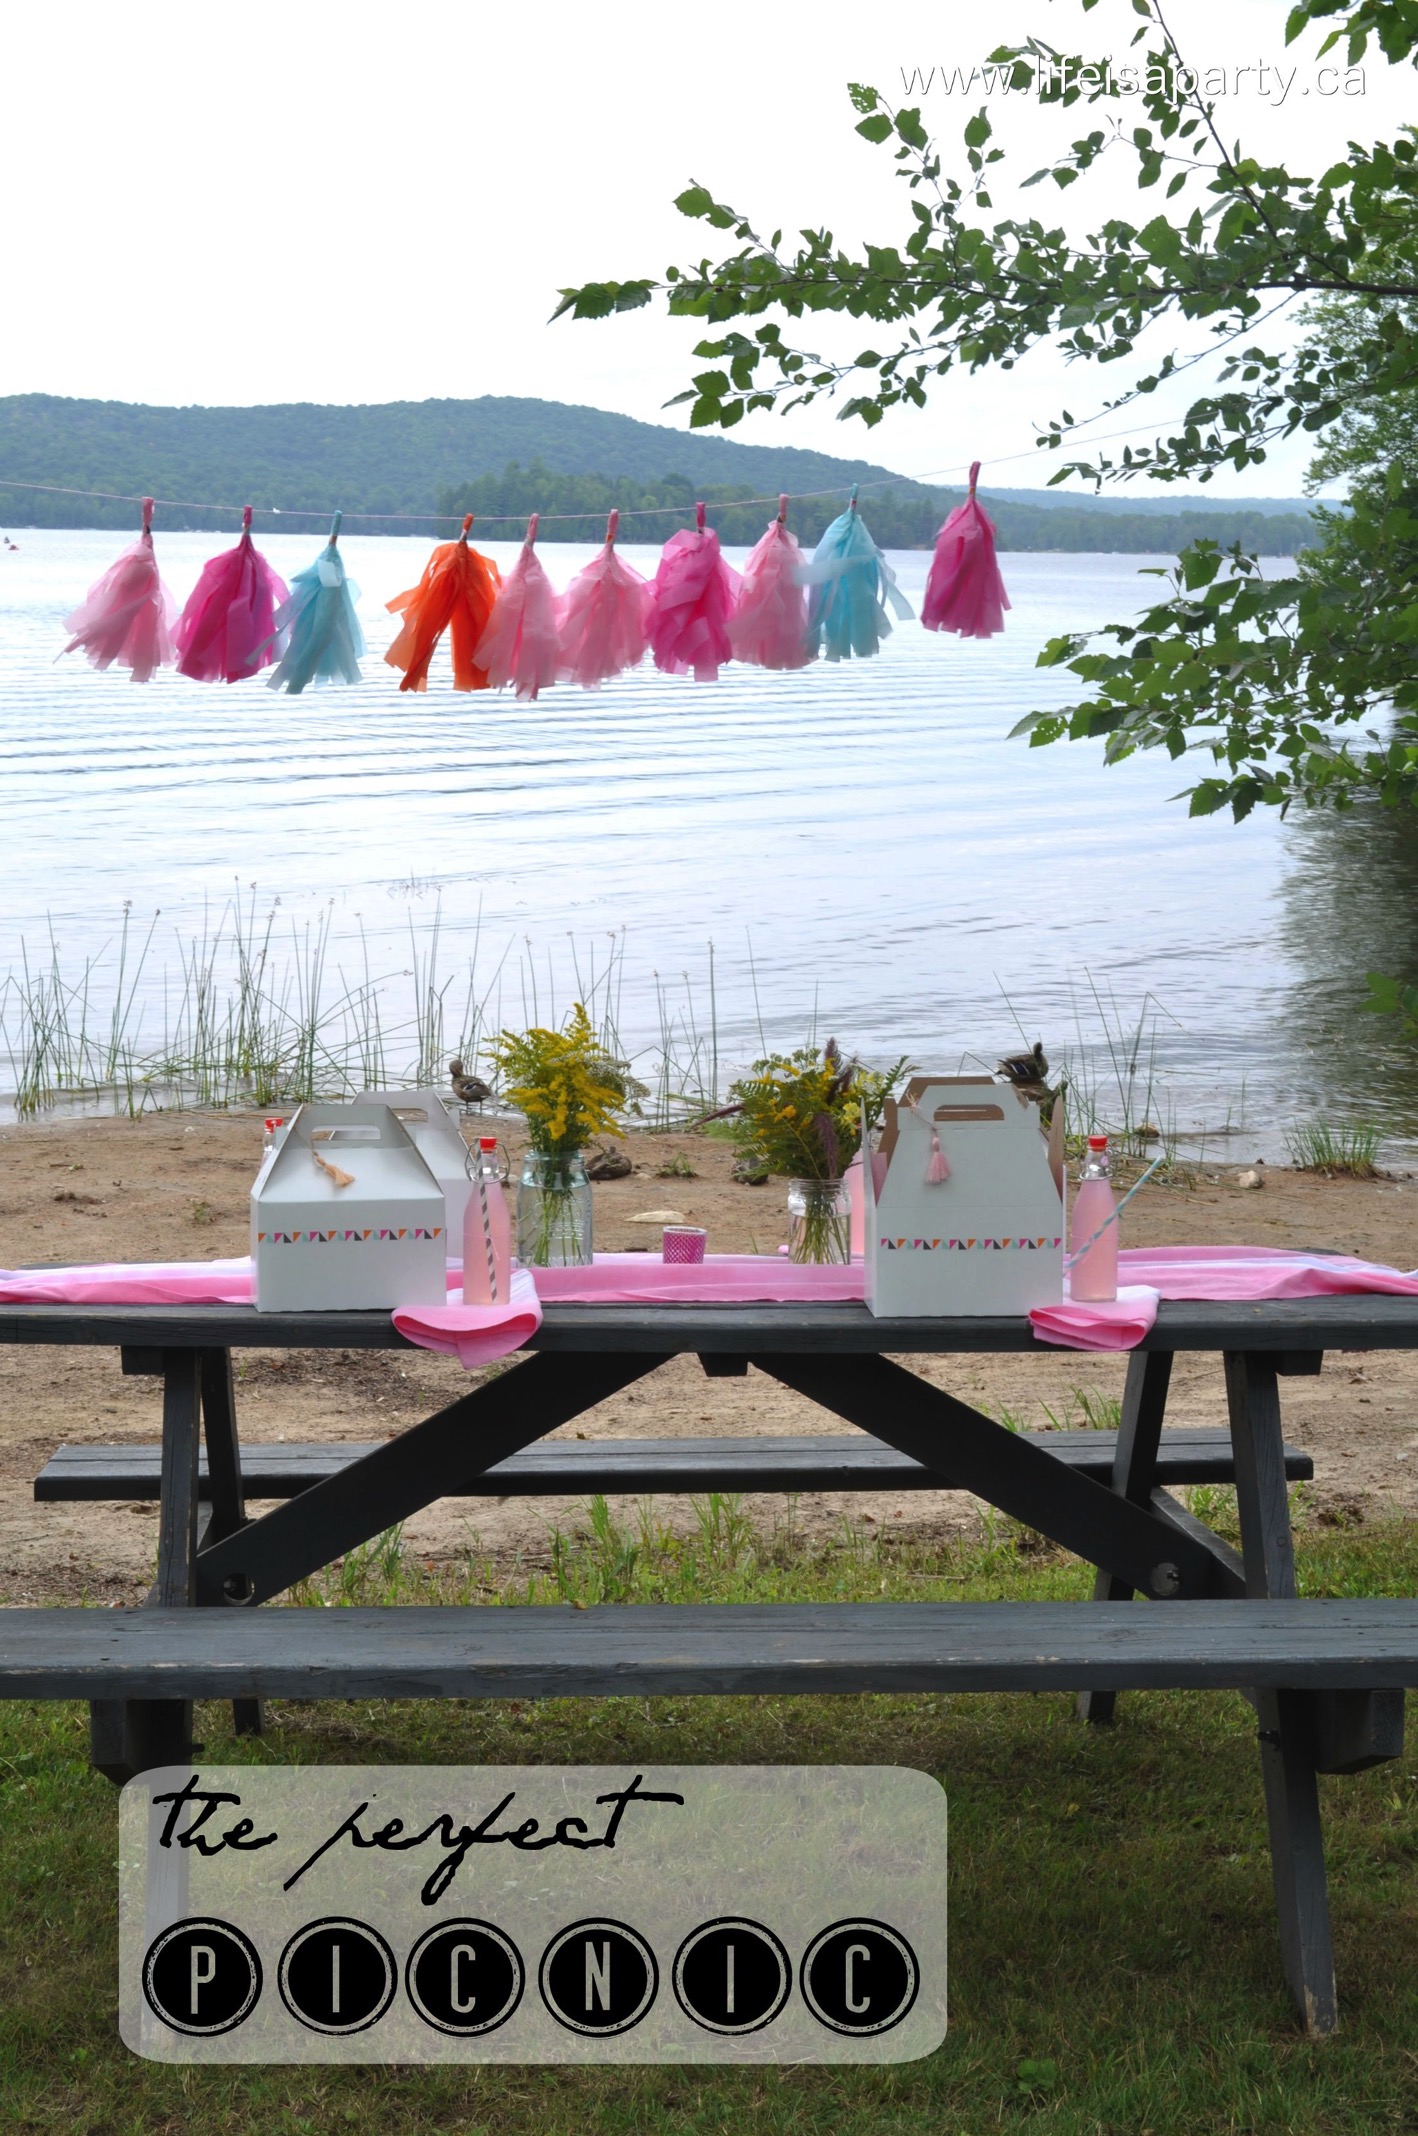 Pretty Picnic Lunch: Individual picnic boxes, wild flowers, tissue paper tassels, and a delicious menu make this the perfect picnic lunch.